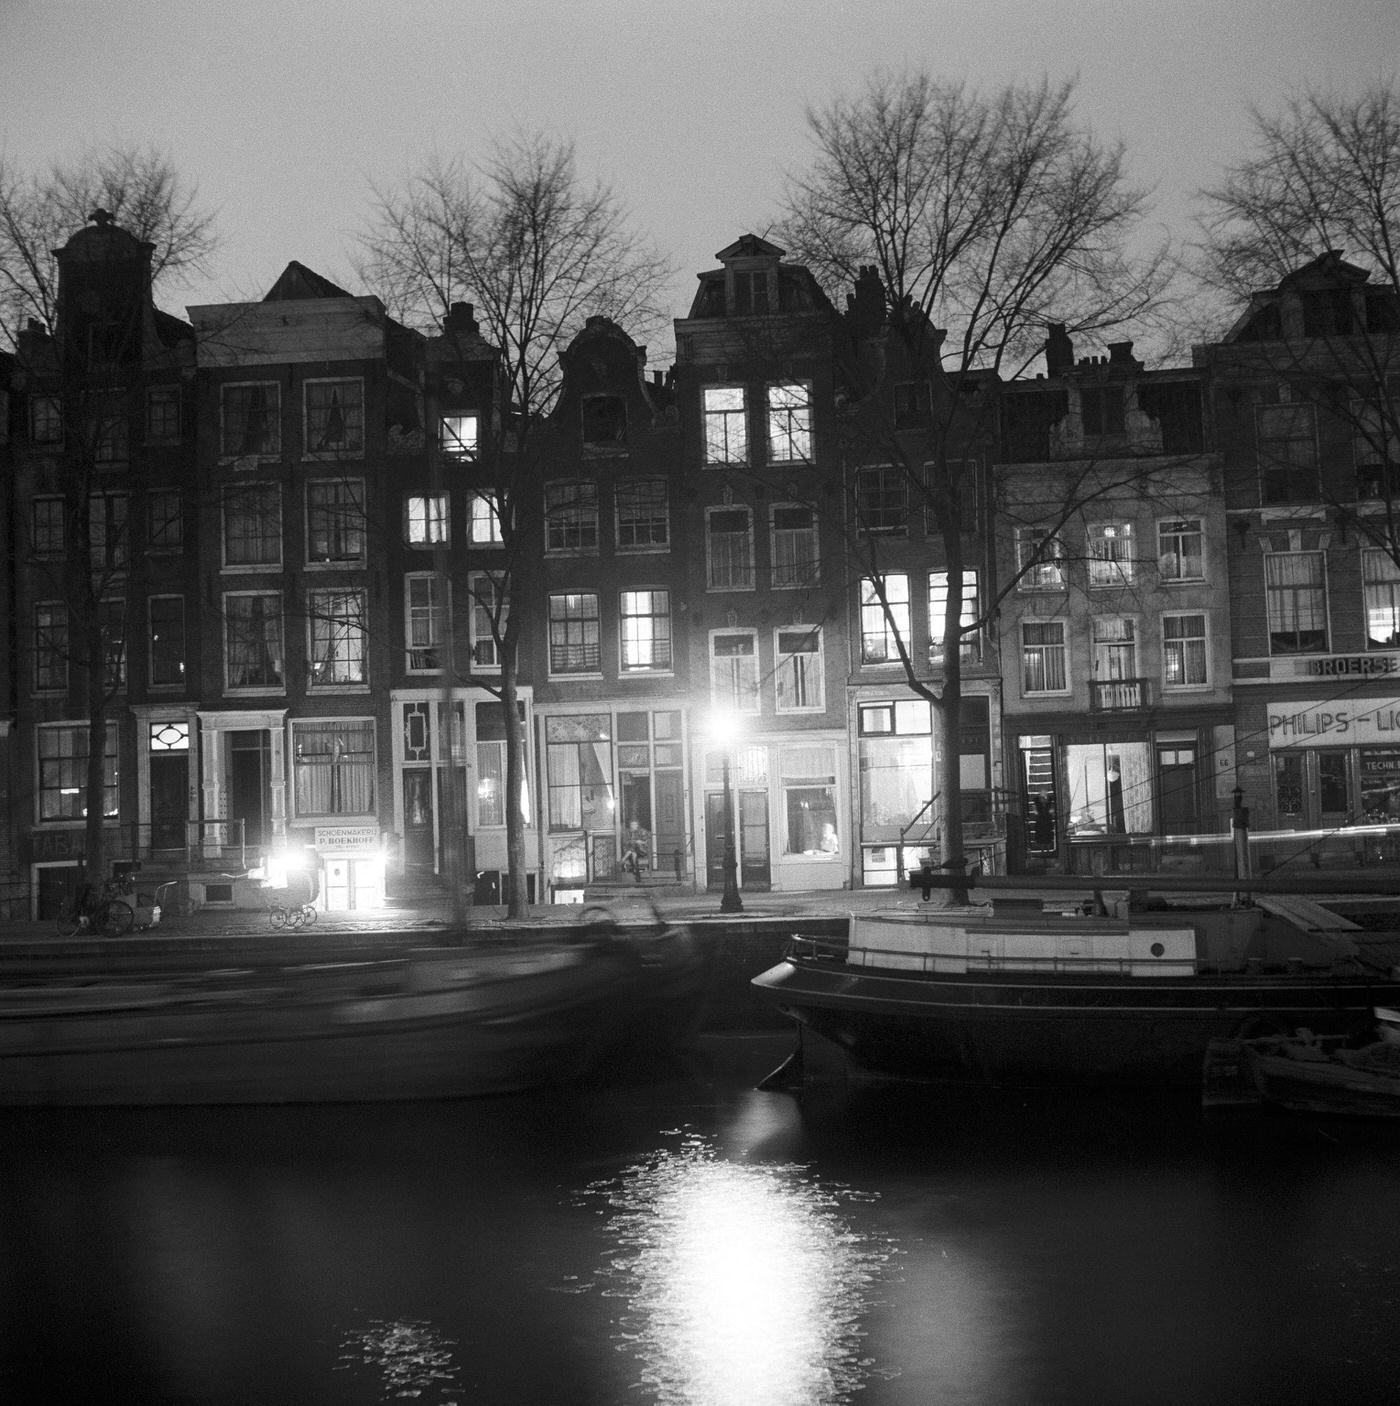 Lights switching on in typical canal houses in Amsterdam, the Netherlands, 1954.